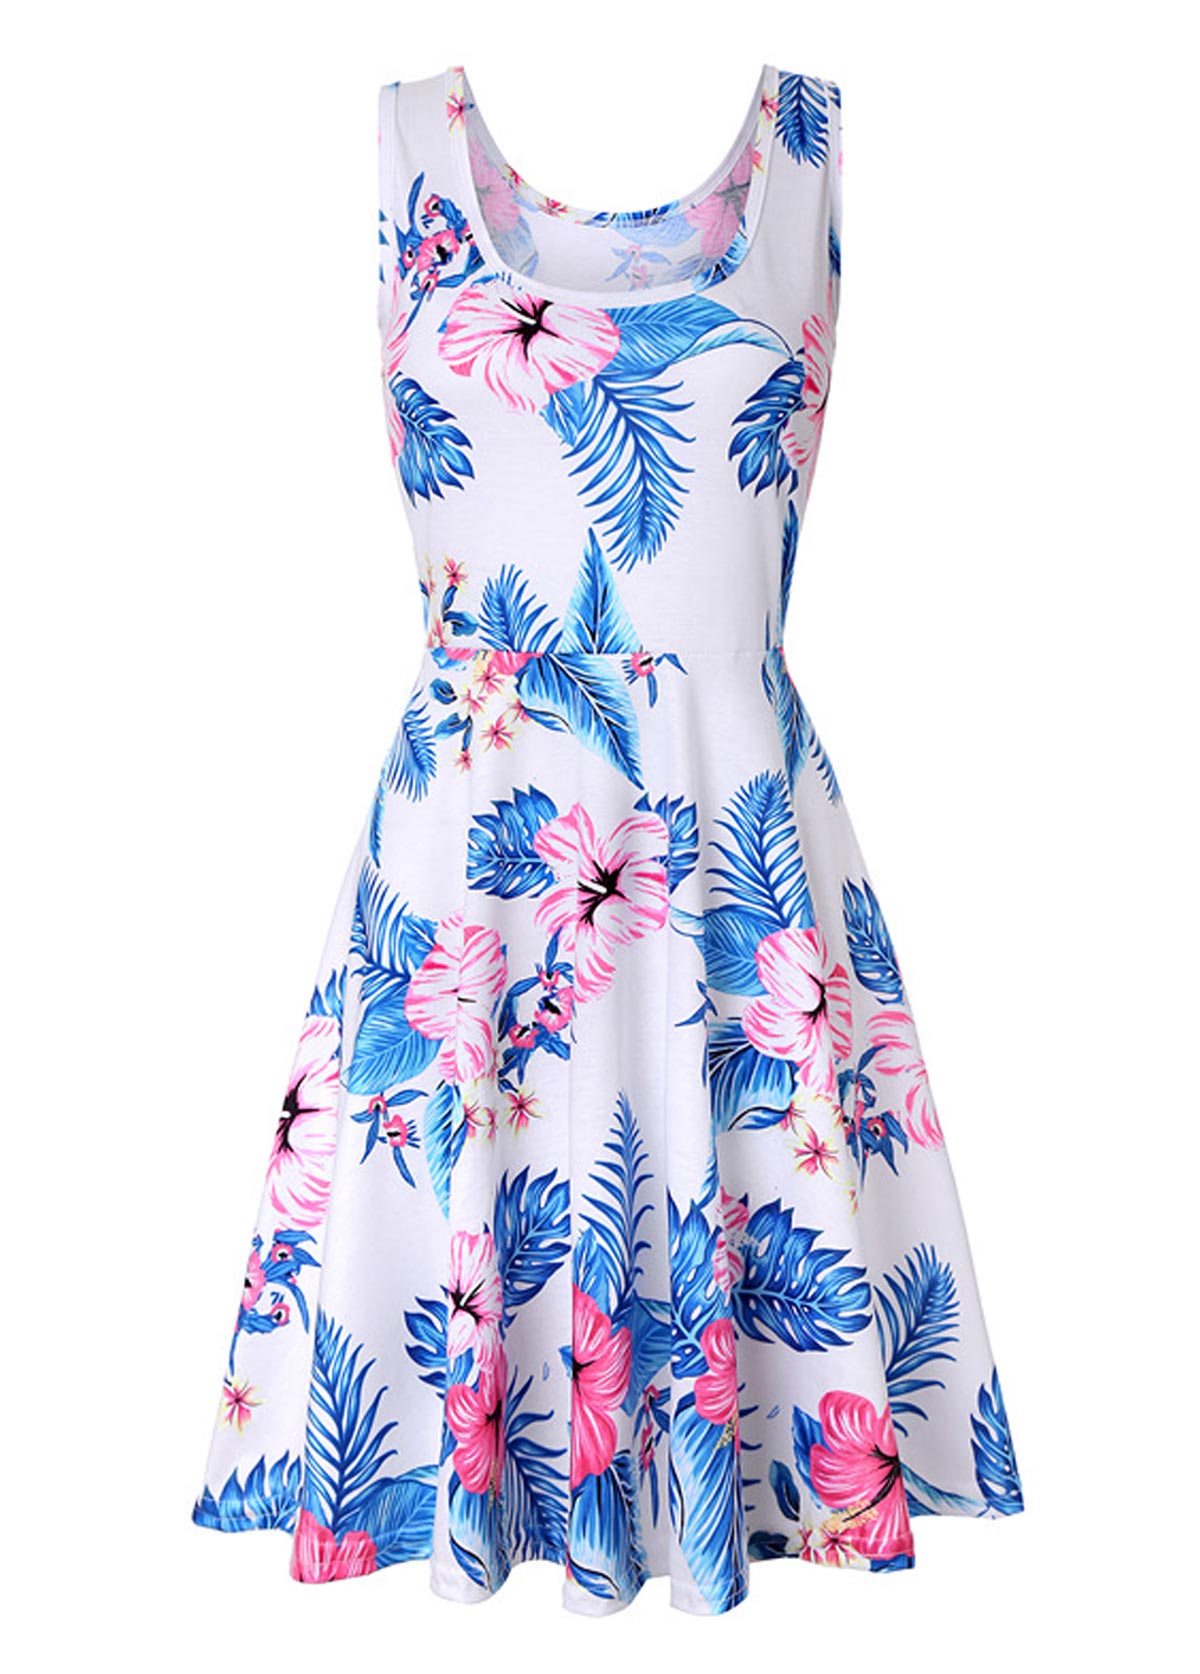 White Sleeveless Floral and Leaf Print Dress